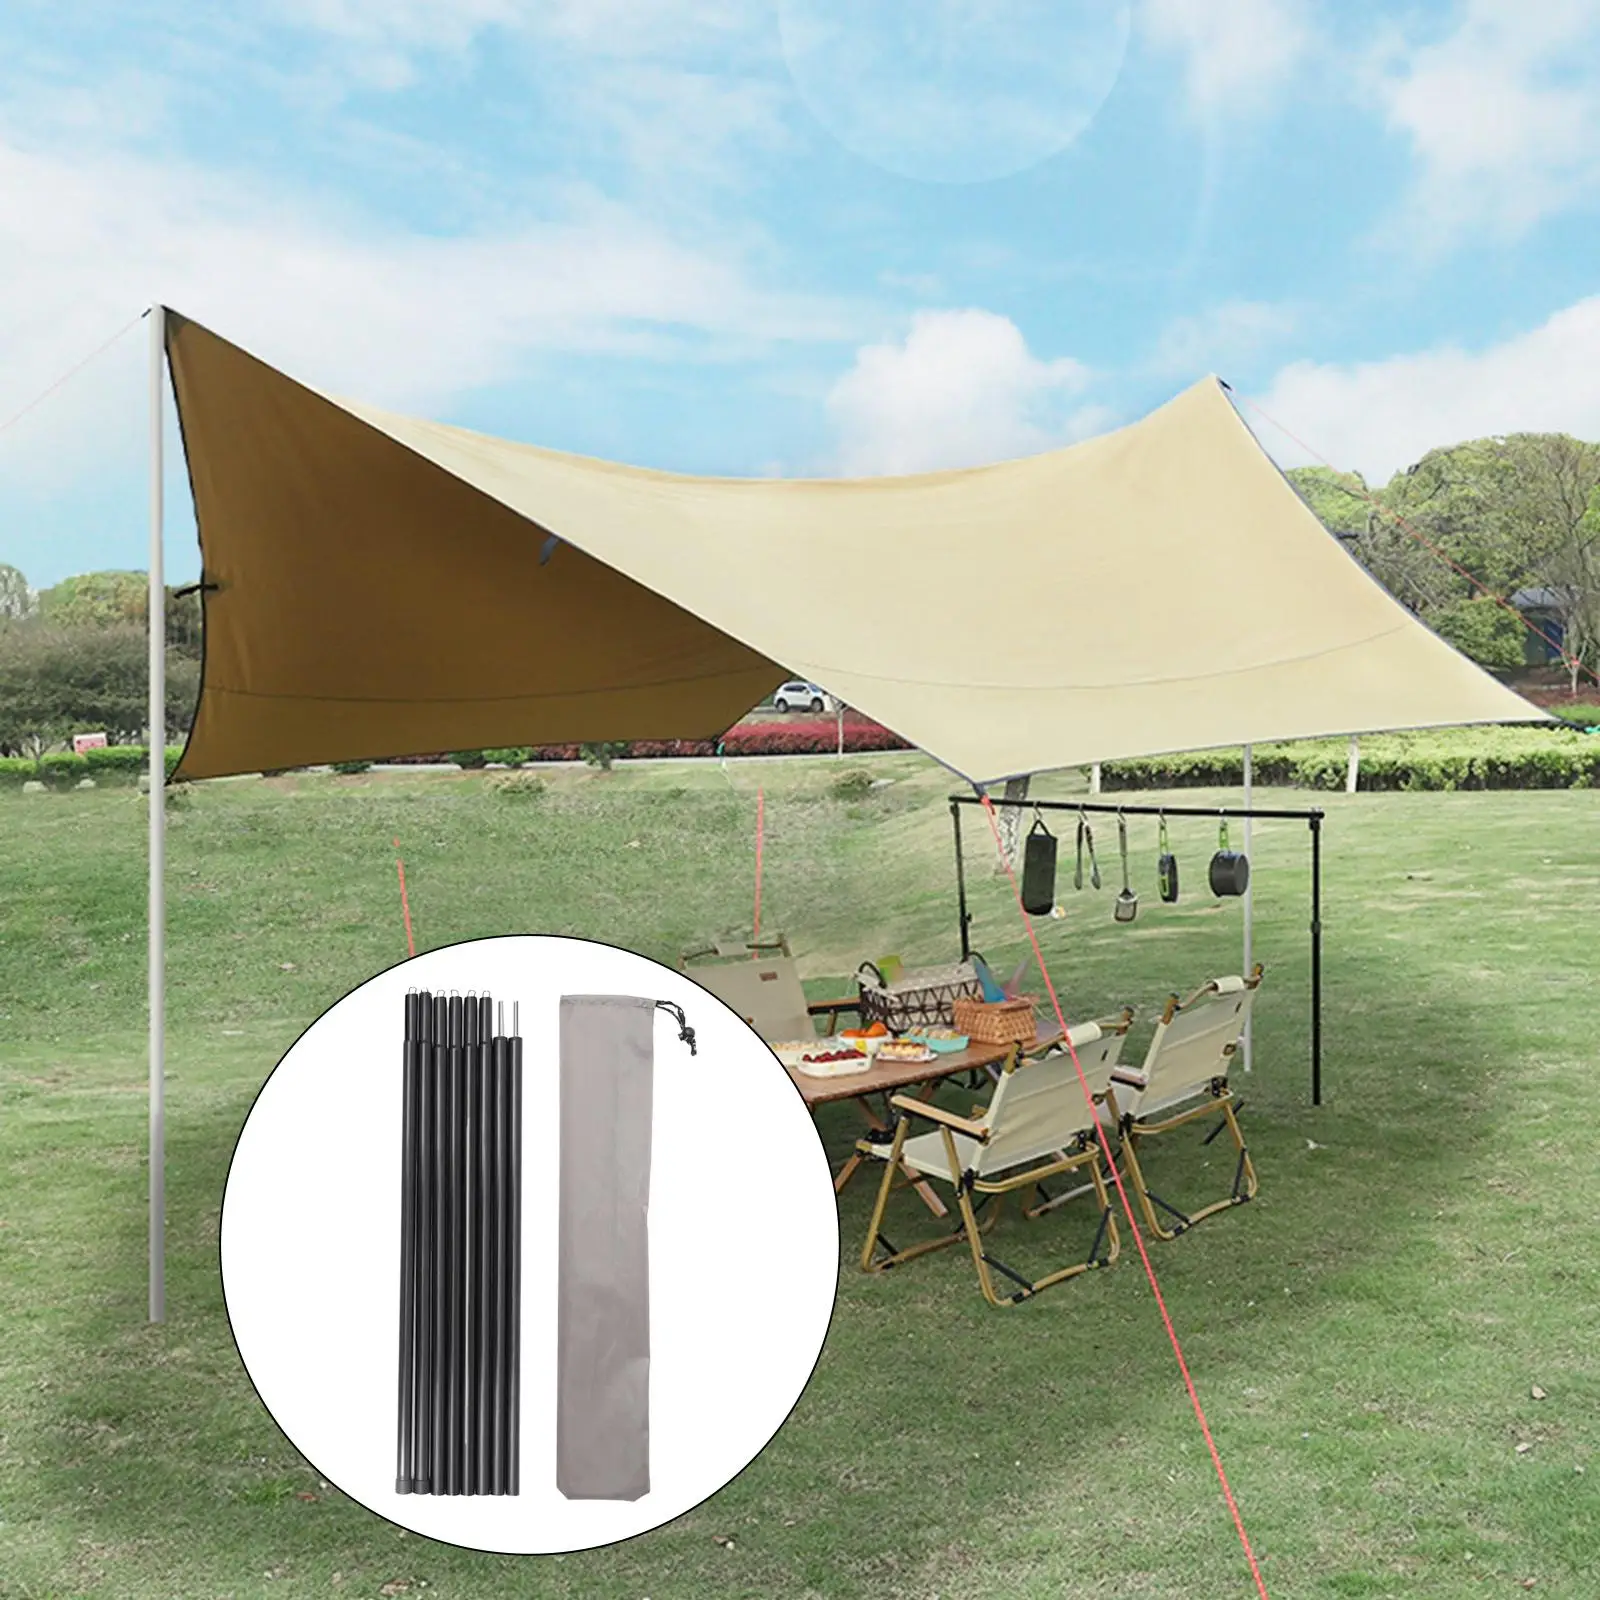 8x Tent Rods Awning Support Pole with Storage Bag Adjustable